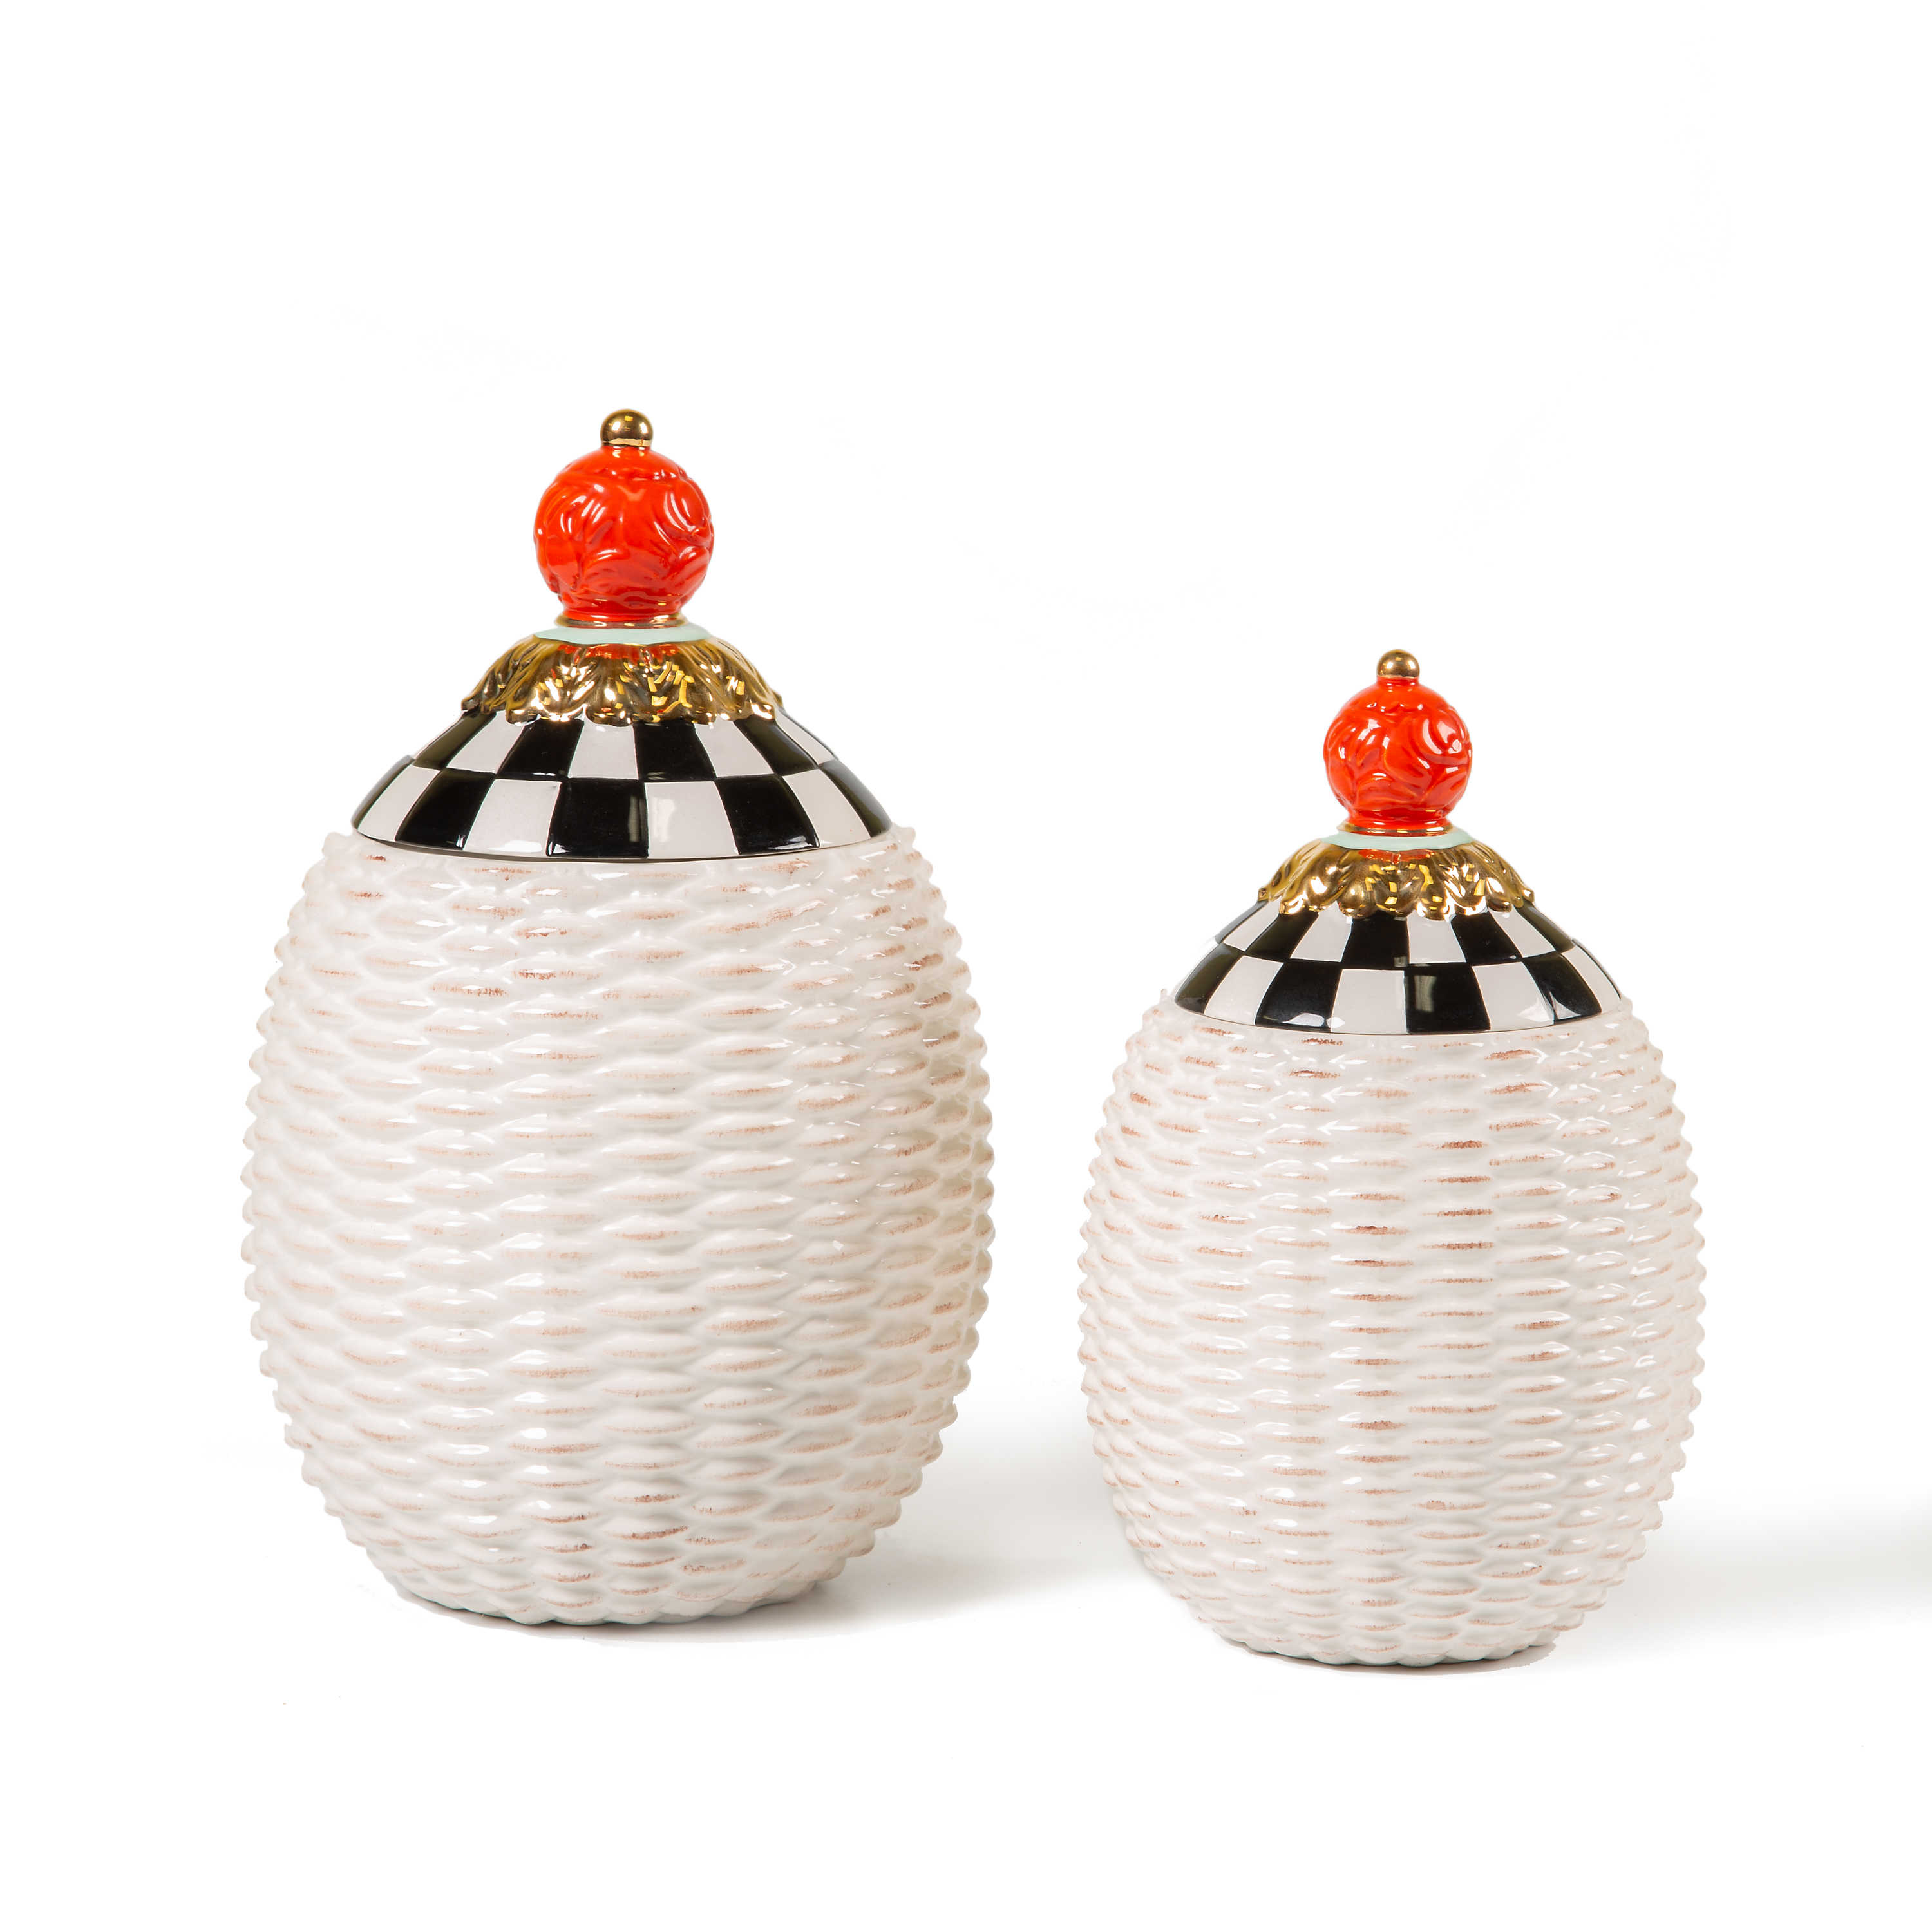 Courtly Basket Weave Canisters -Set of 2 mackenzie-childs Panama 0